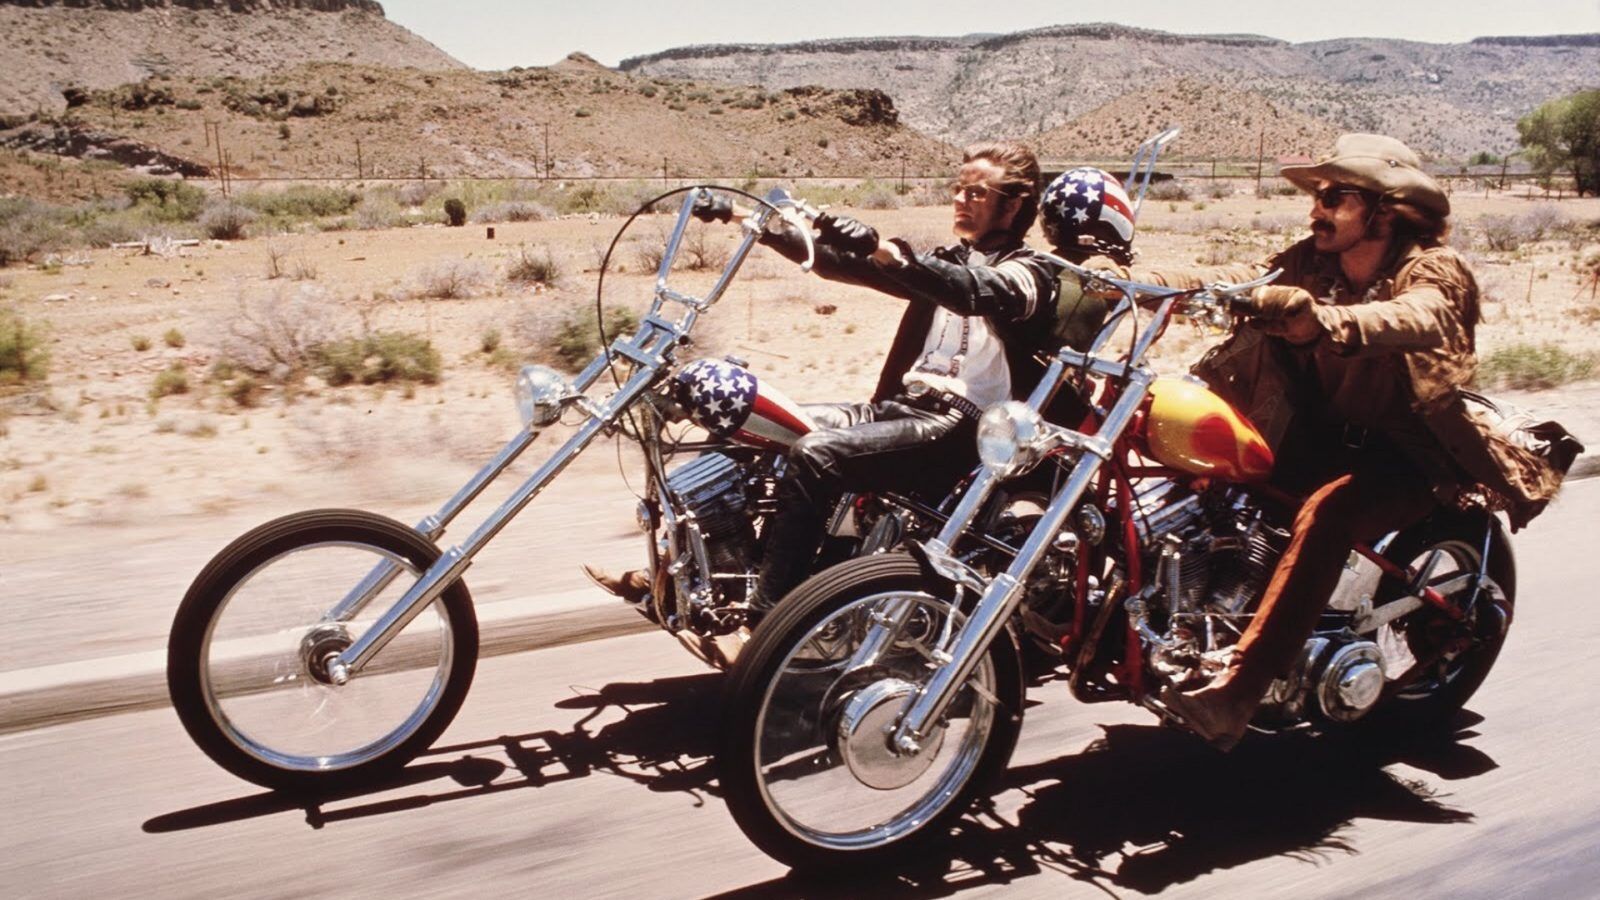 80s movie motorcycle time travel